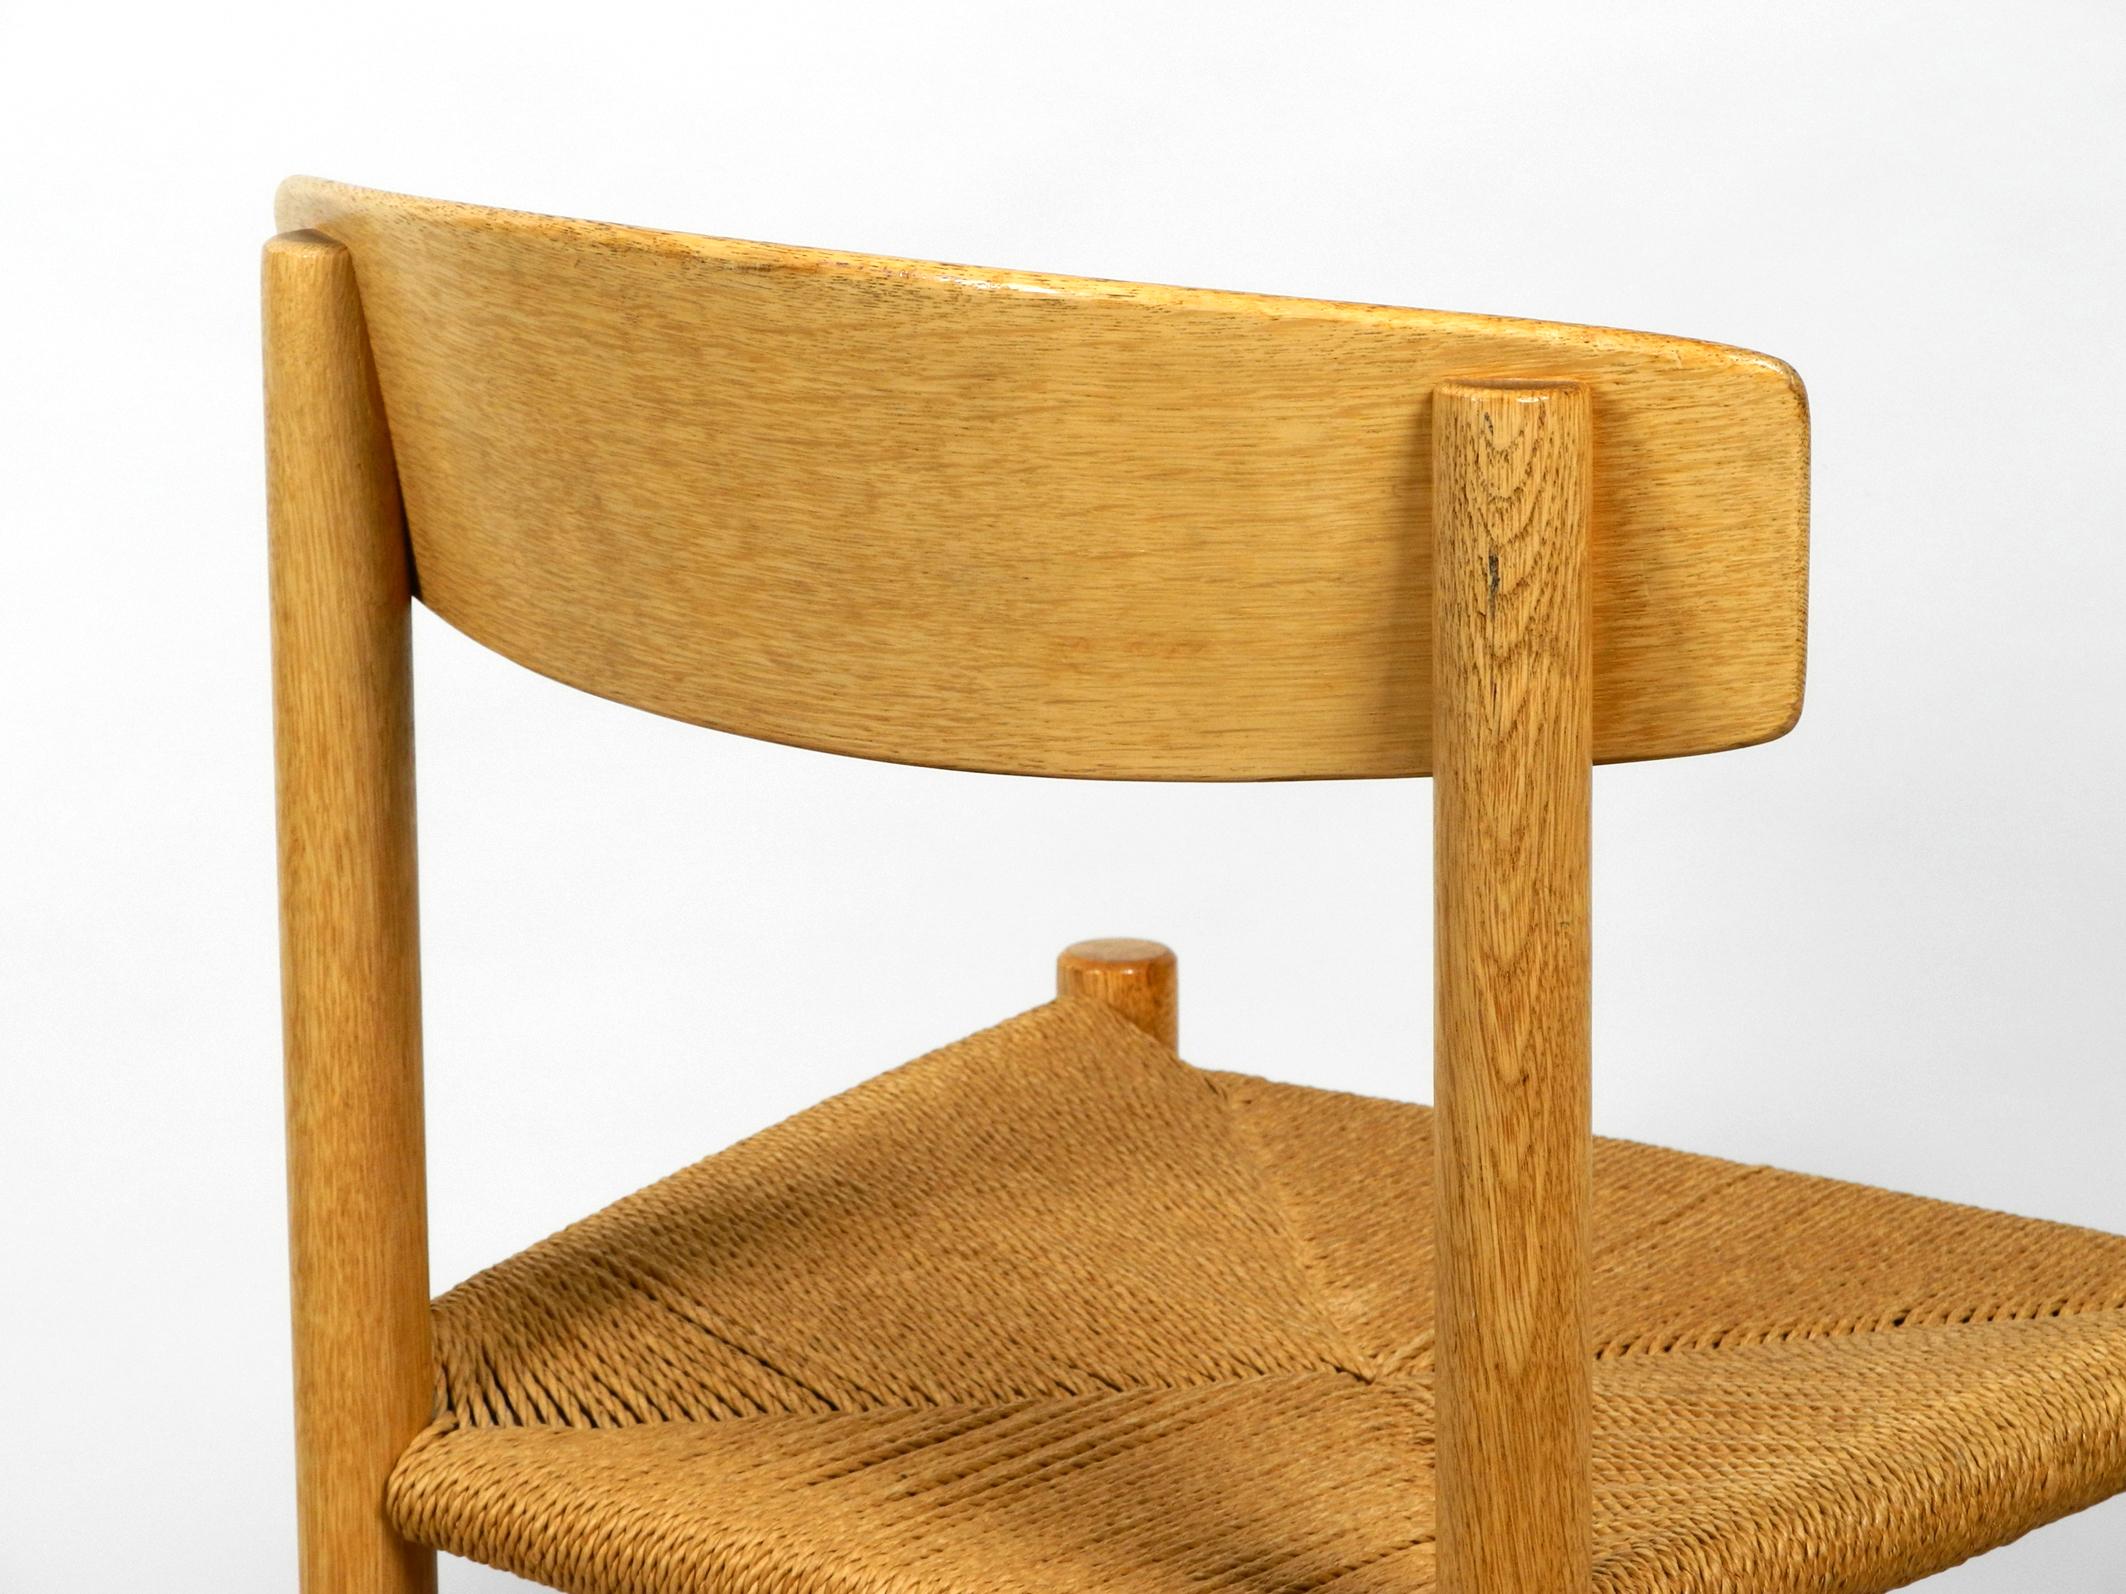 Four J39 Mogensen Chairs in Oak and Cord Weaving by Børge Mogensen Fredericia 1